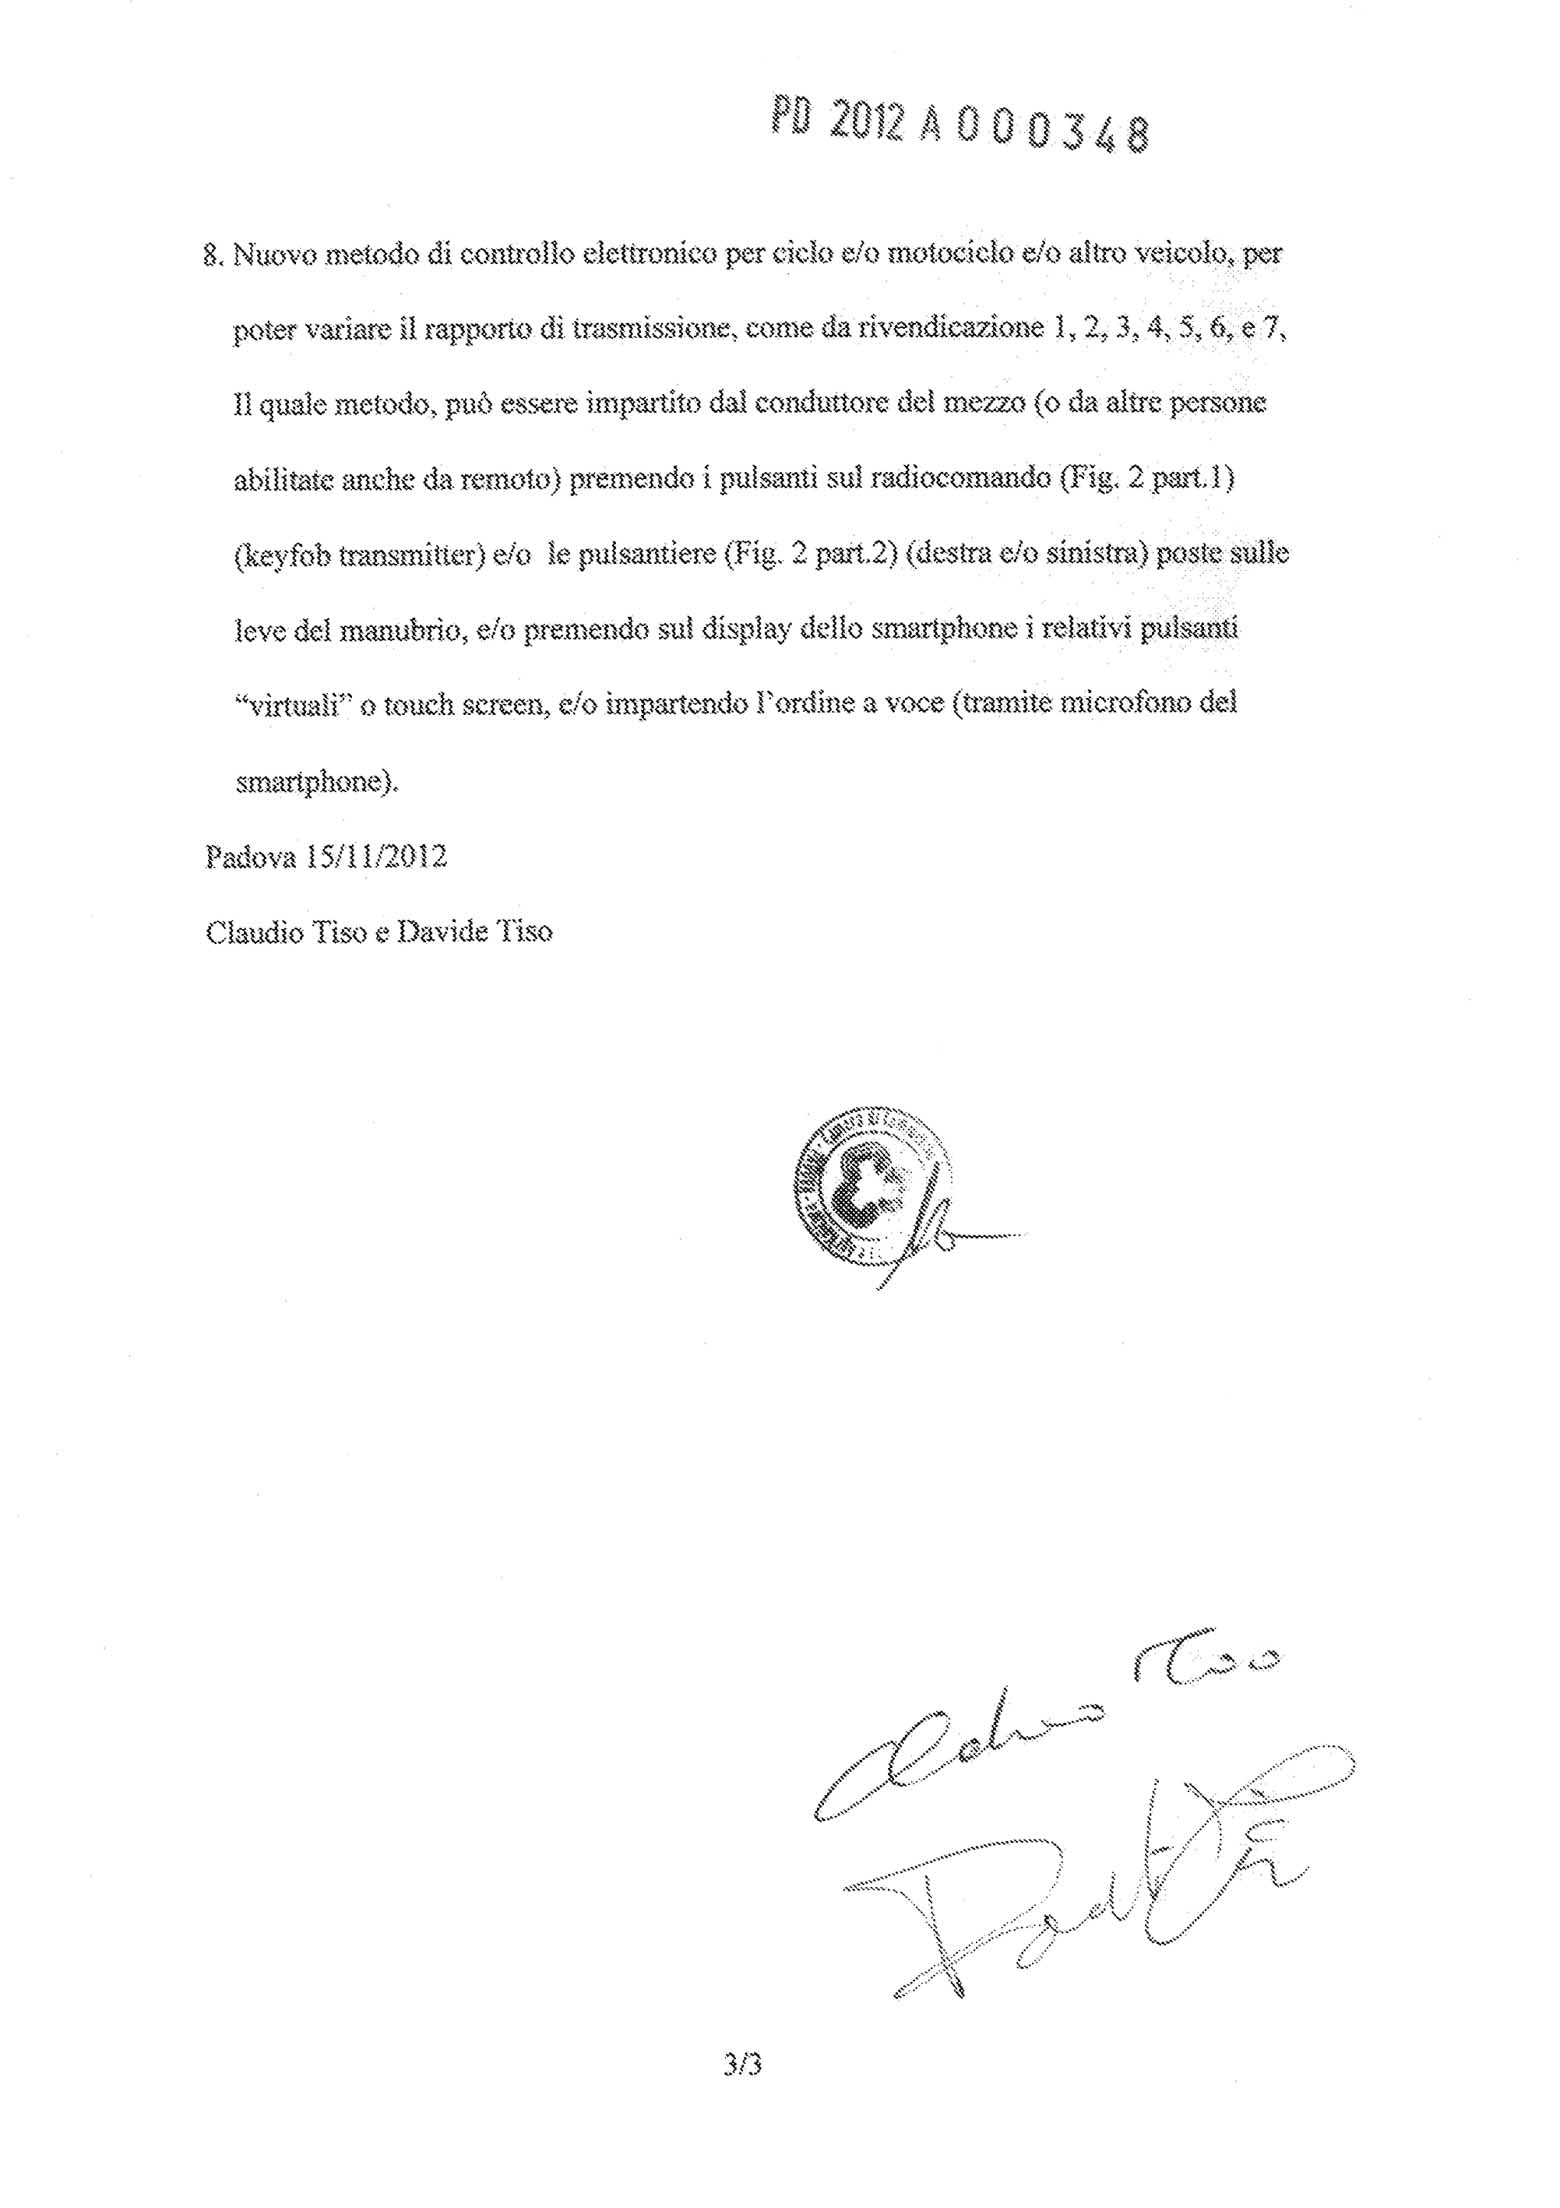 Italian Patent 2012 A000348 - Tiso main scan 09 image